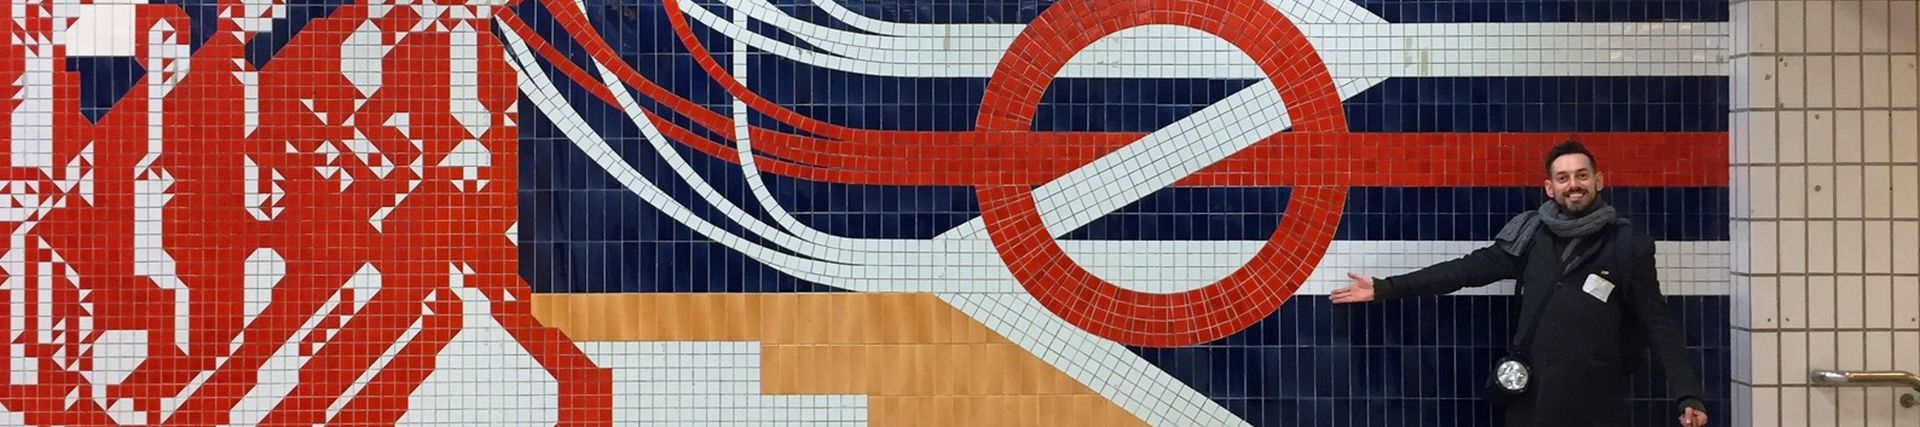 A photo of tile mosaic for the old King's Cross Thameslink entrance. The roundel inside the National rail symbol with red stylised people in the mosaic going down stairs